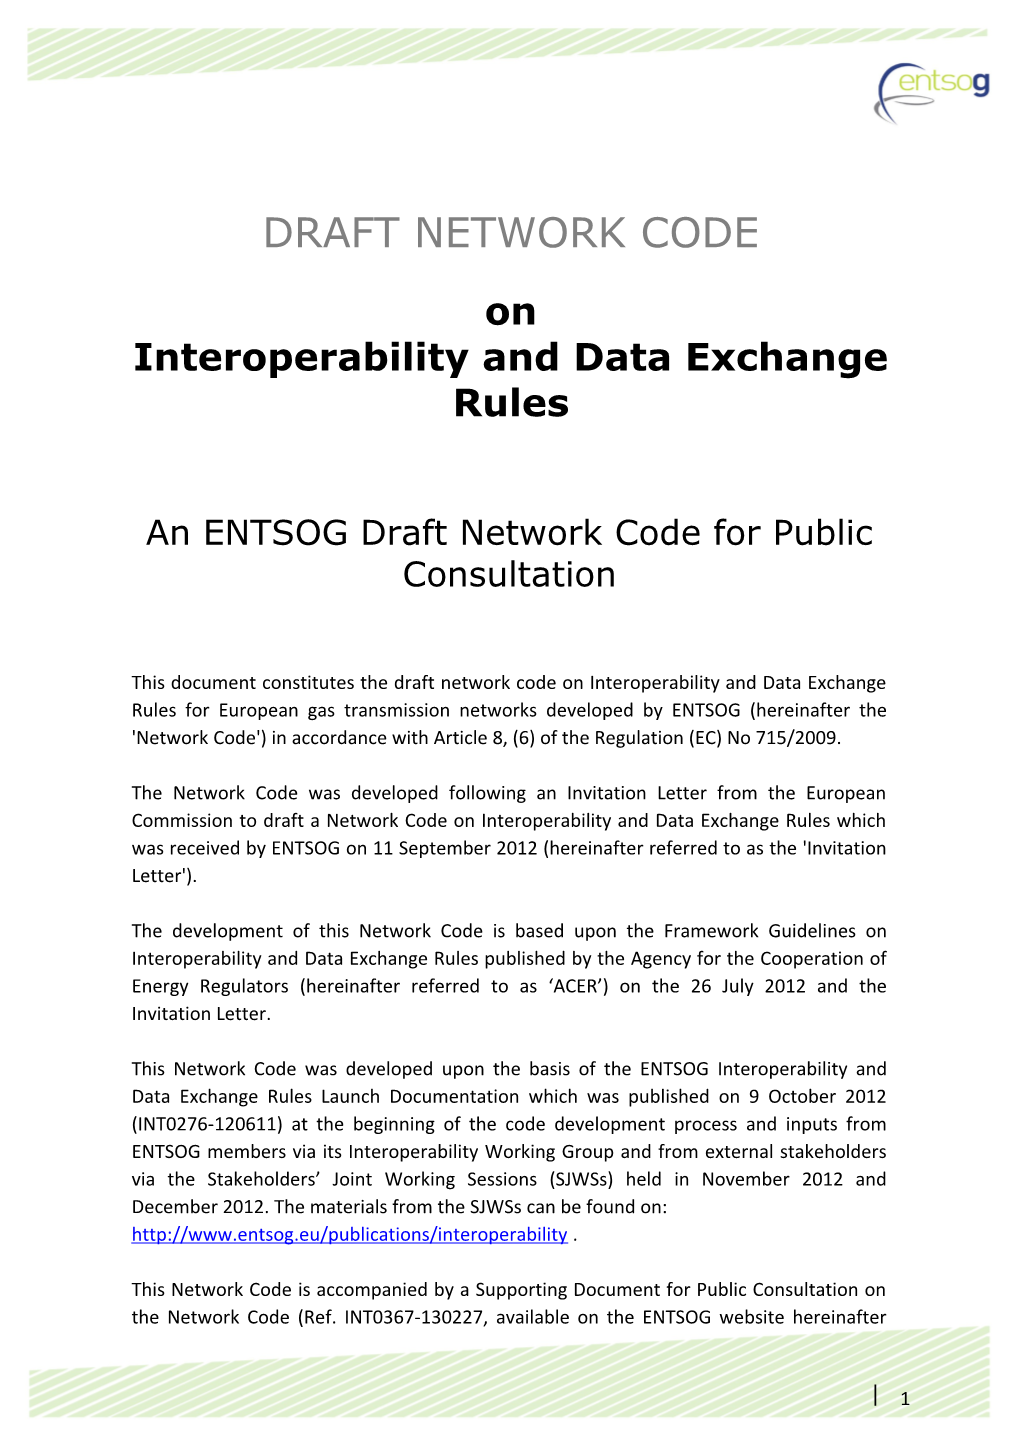 Network Code on Interoperability and Data Exchange Rules